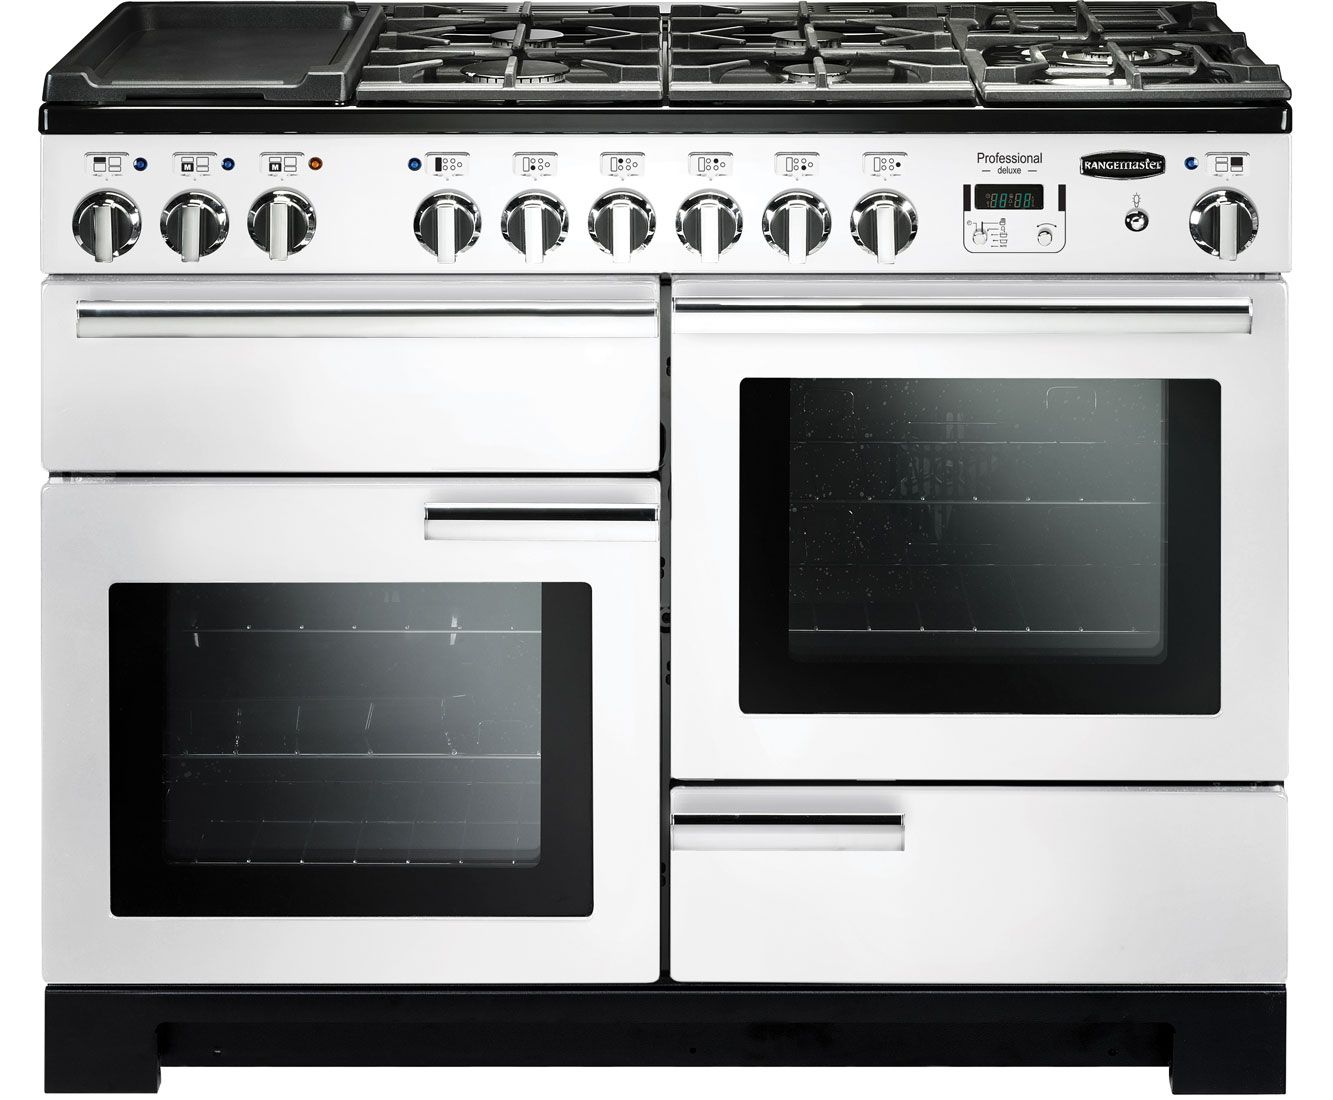 Rangemaster Professional Deluxe PDL110DFFWH/C 110cm Dual Fuel Range Cooker - White - A/A Rated, White